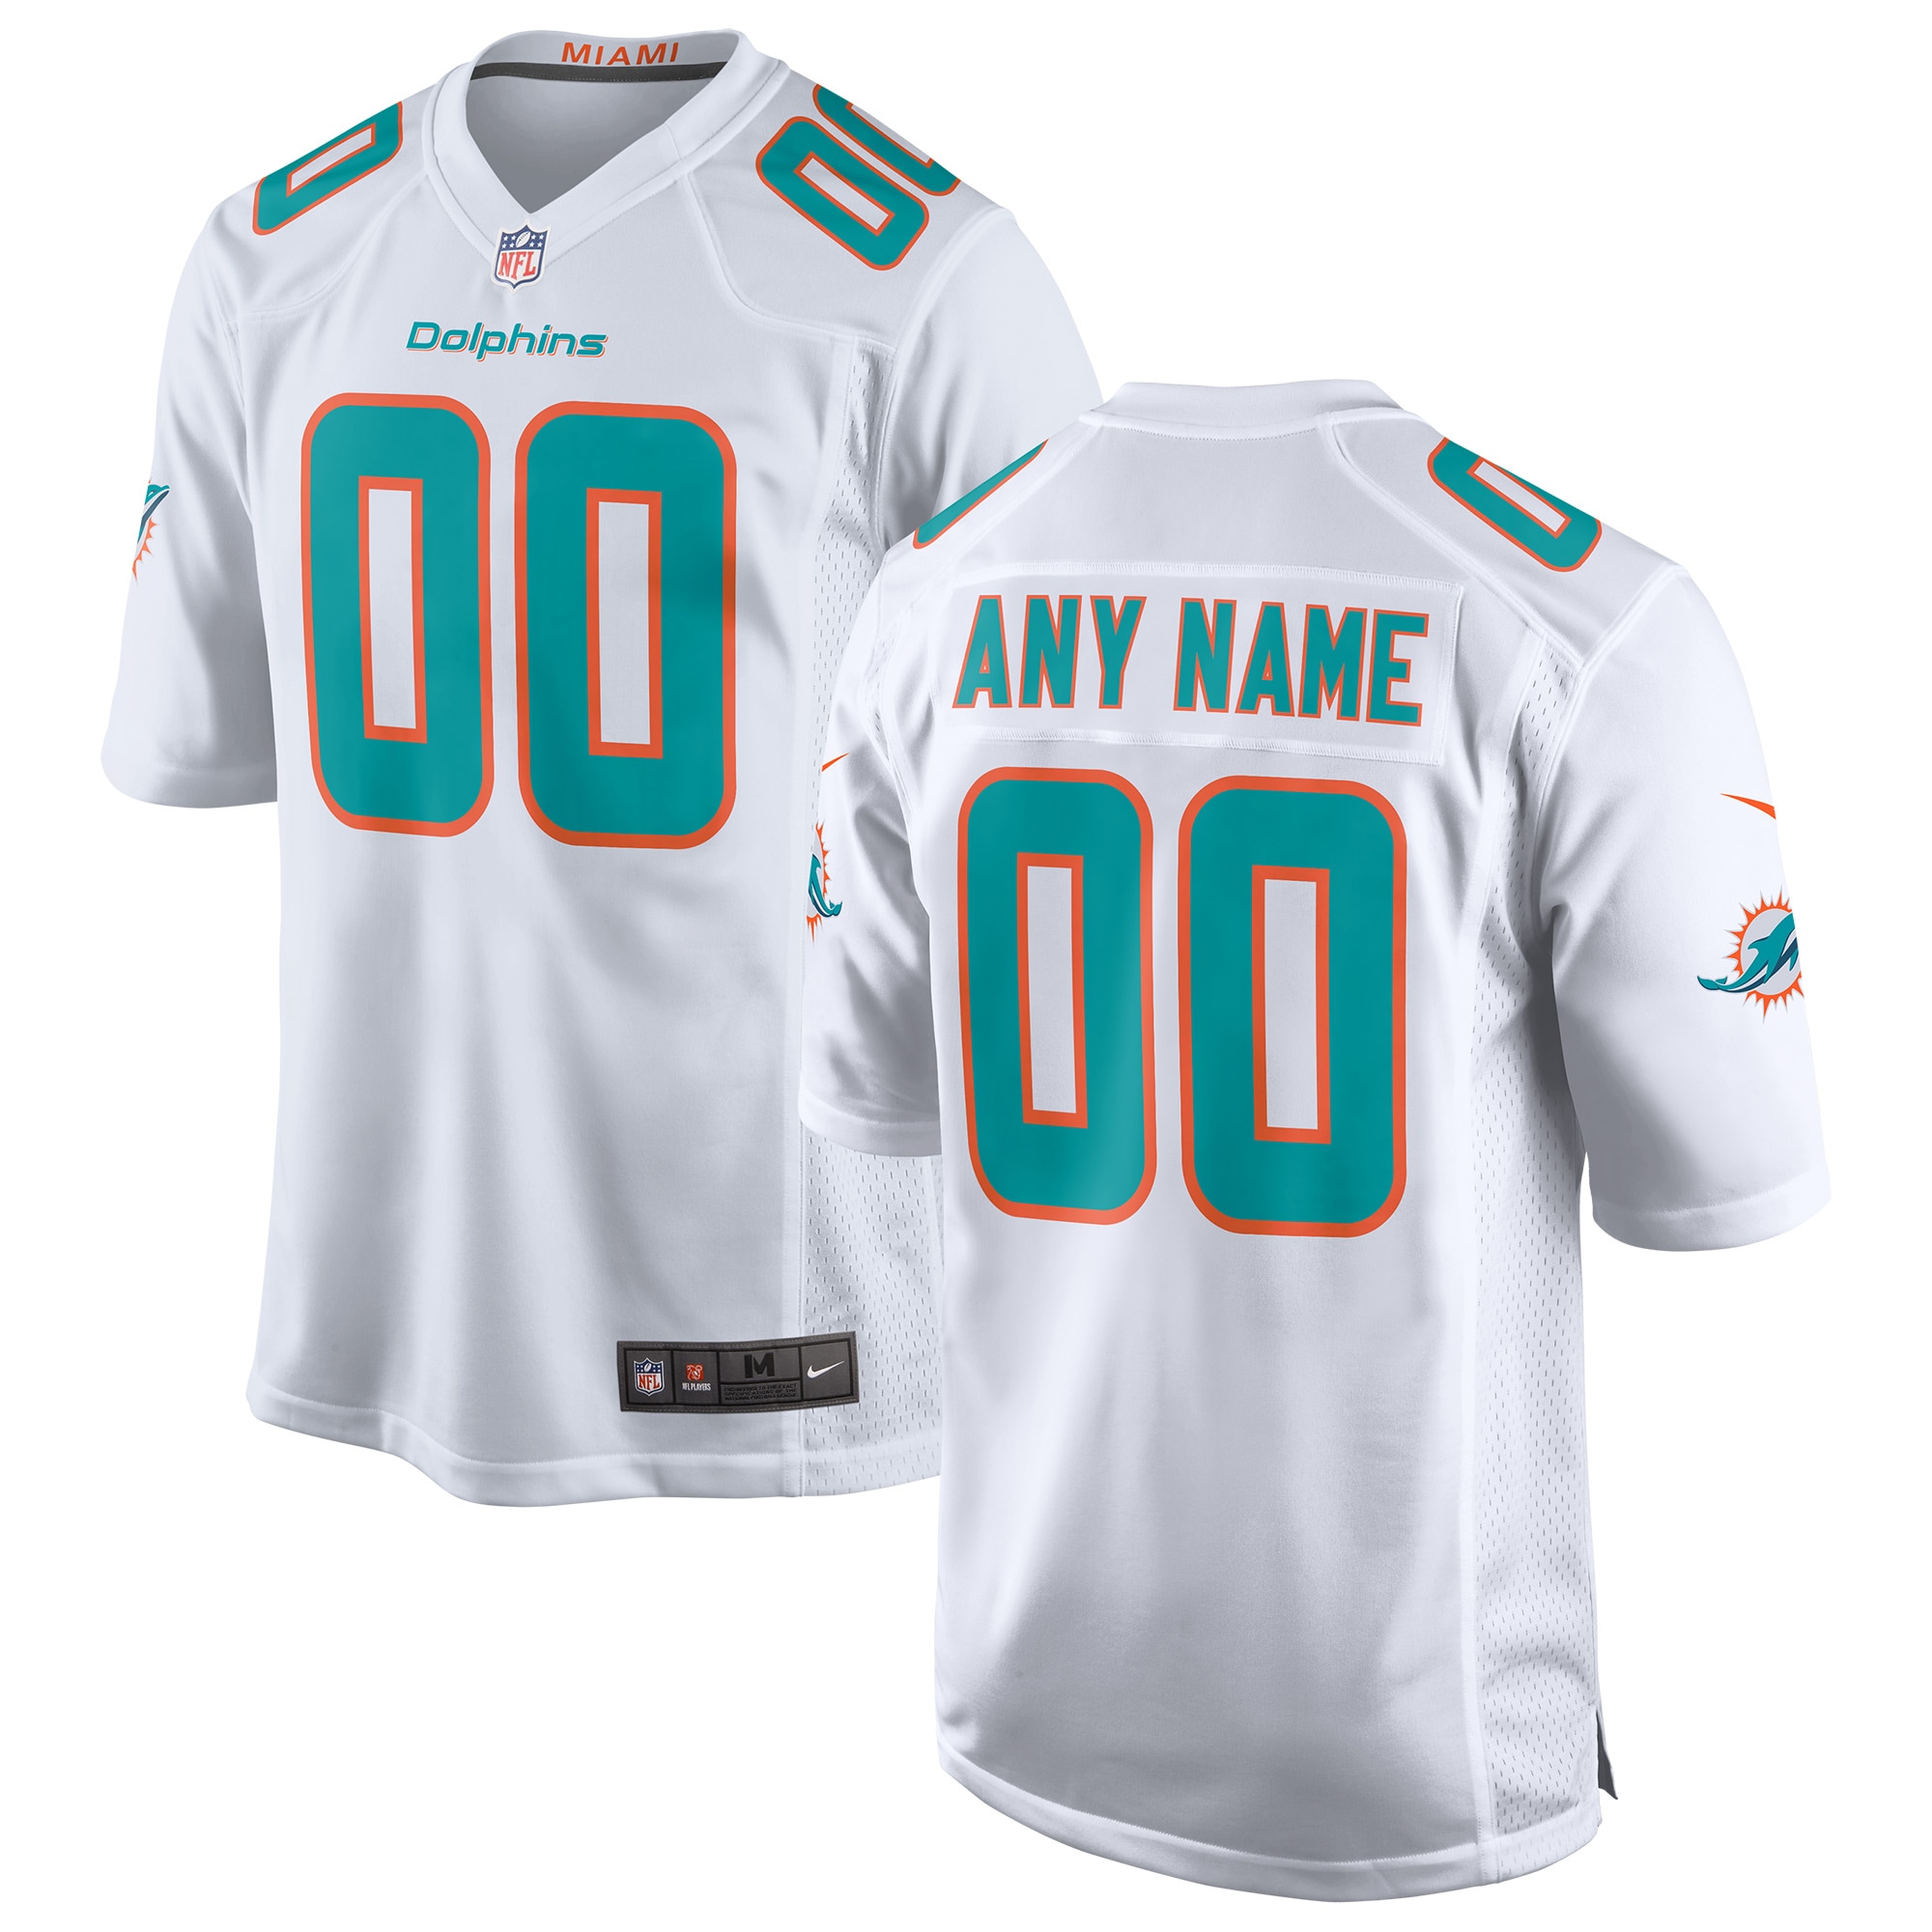 Buy Miami Dolphins Nike Custom Game Jersey - White F3889174 Online